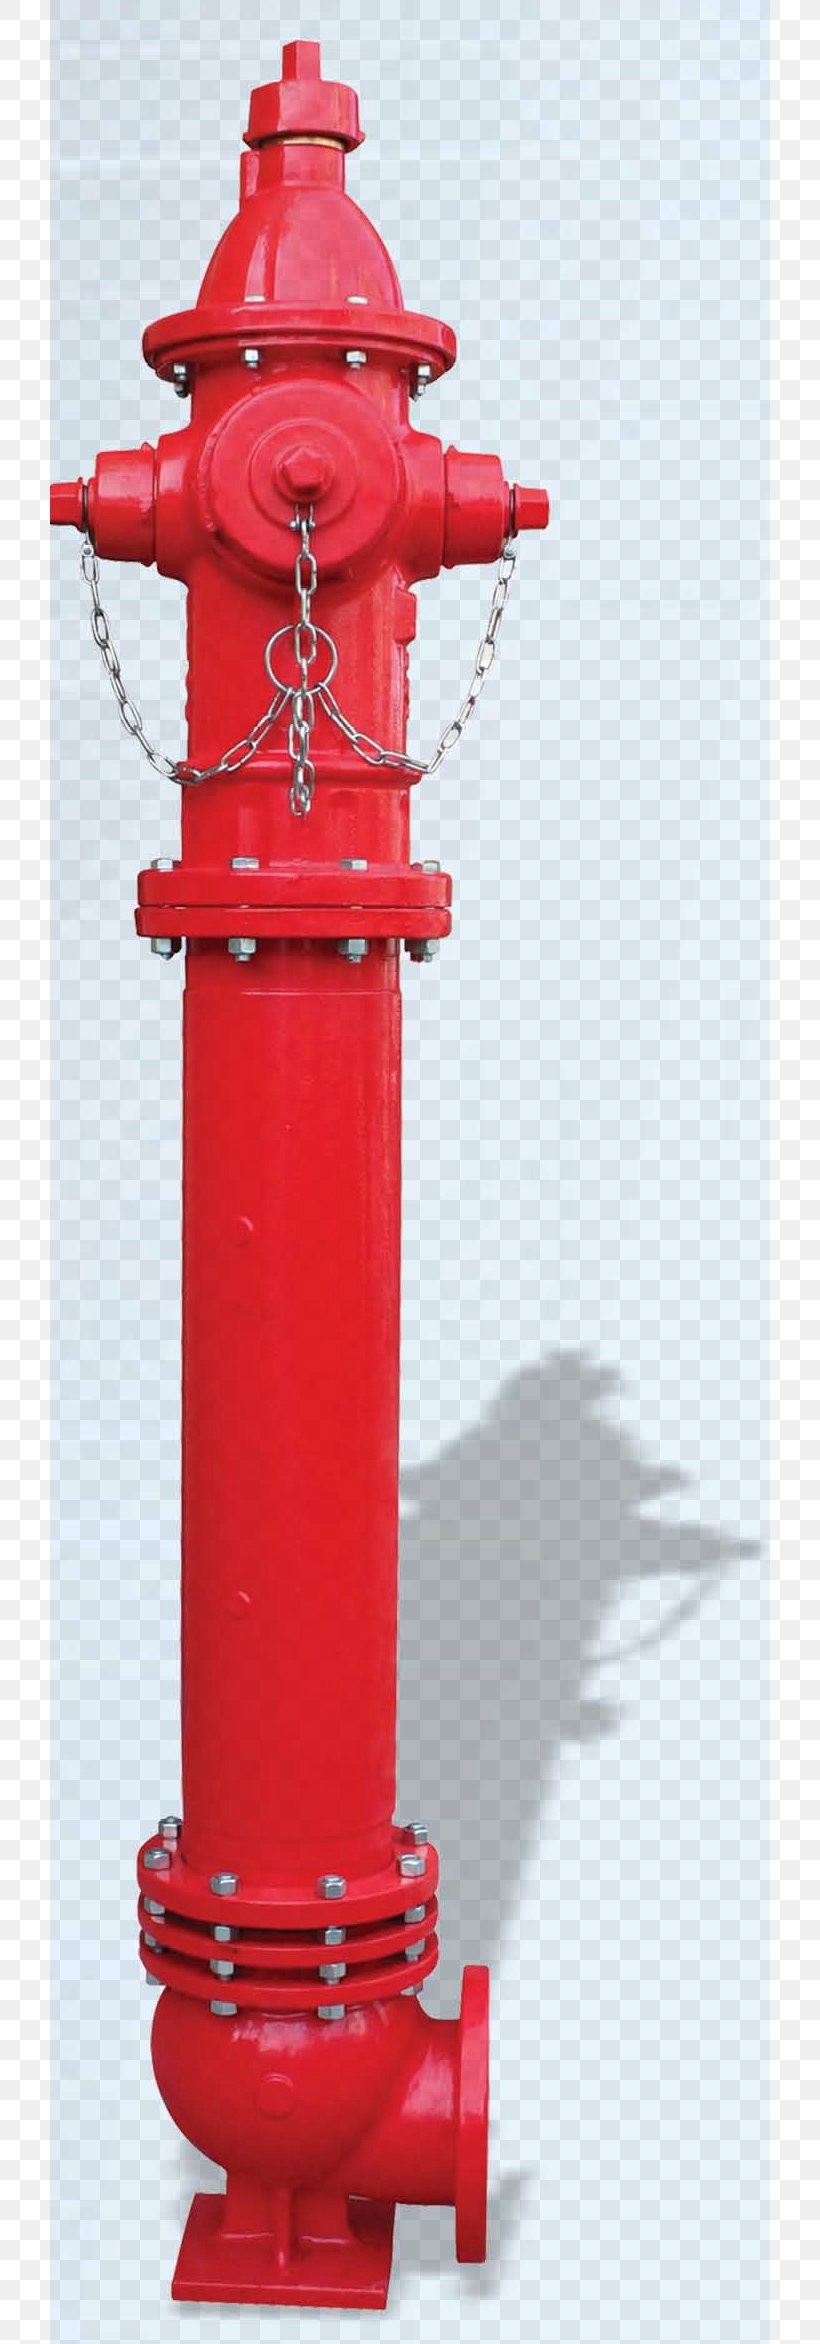 Fire Hydrant Conflagration Fire Protection Valve, PNG, 720x2344px, Fire Hydrant, Conflagration, Fire, Fire Hose, Fire Protection Download Free